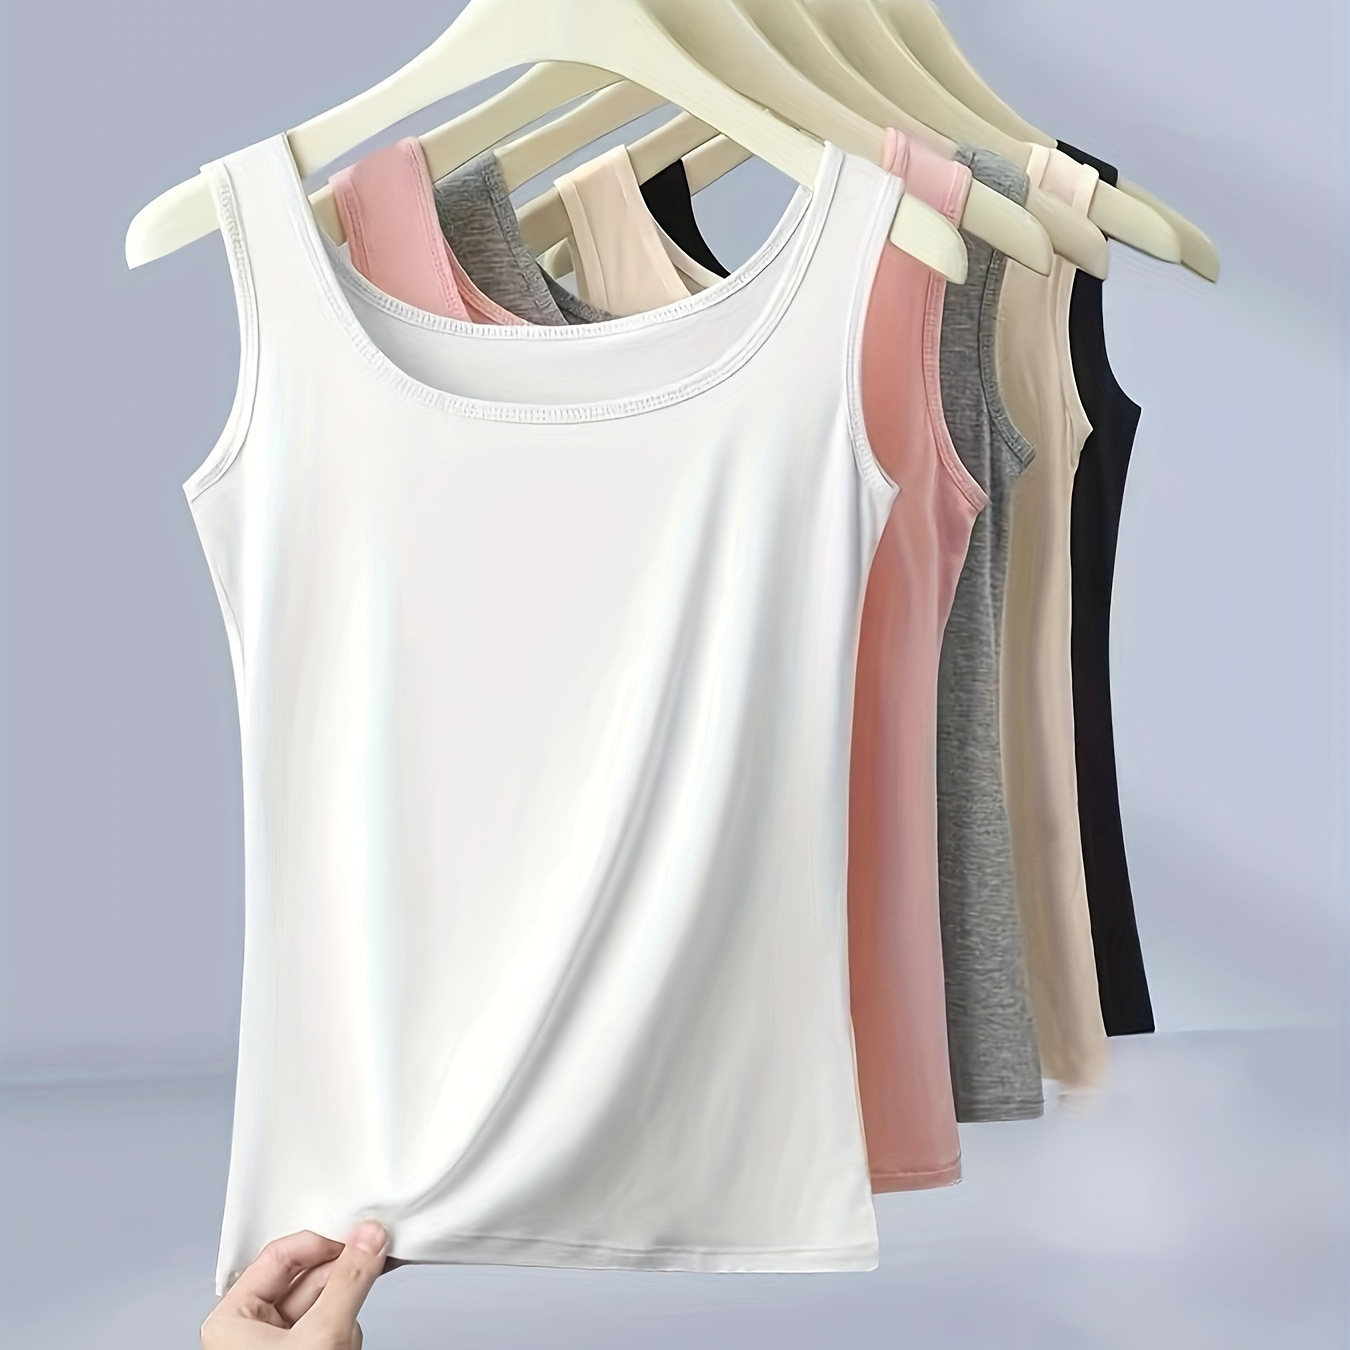 

5-pack Women's Cotton Blend Tank Tops, Stretch Comfort Casual Home Wear & Layering Camis, Assorted Colors, Sizes S-xl